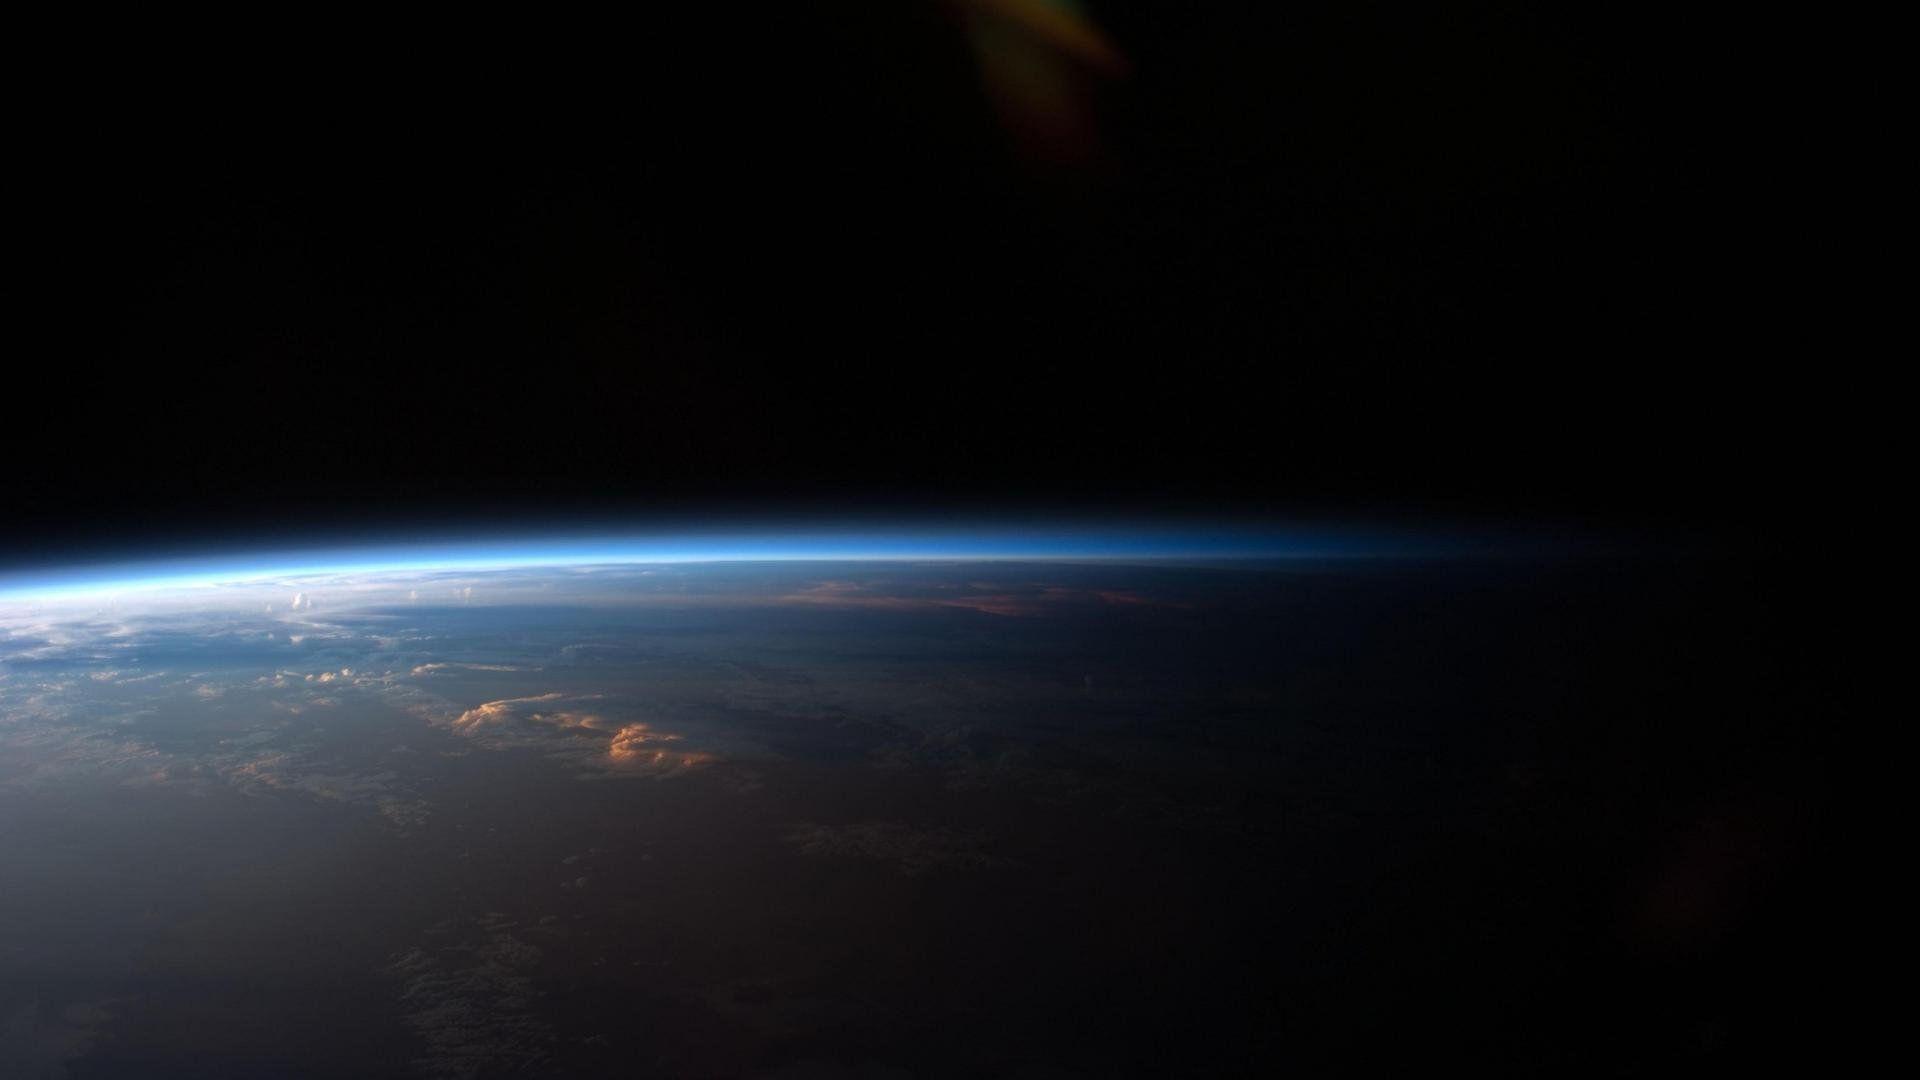 Space Earth Wallpaper 1920×1080 Image Of Earth From Space